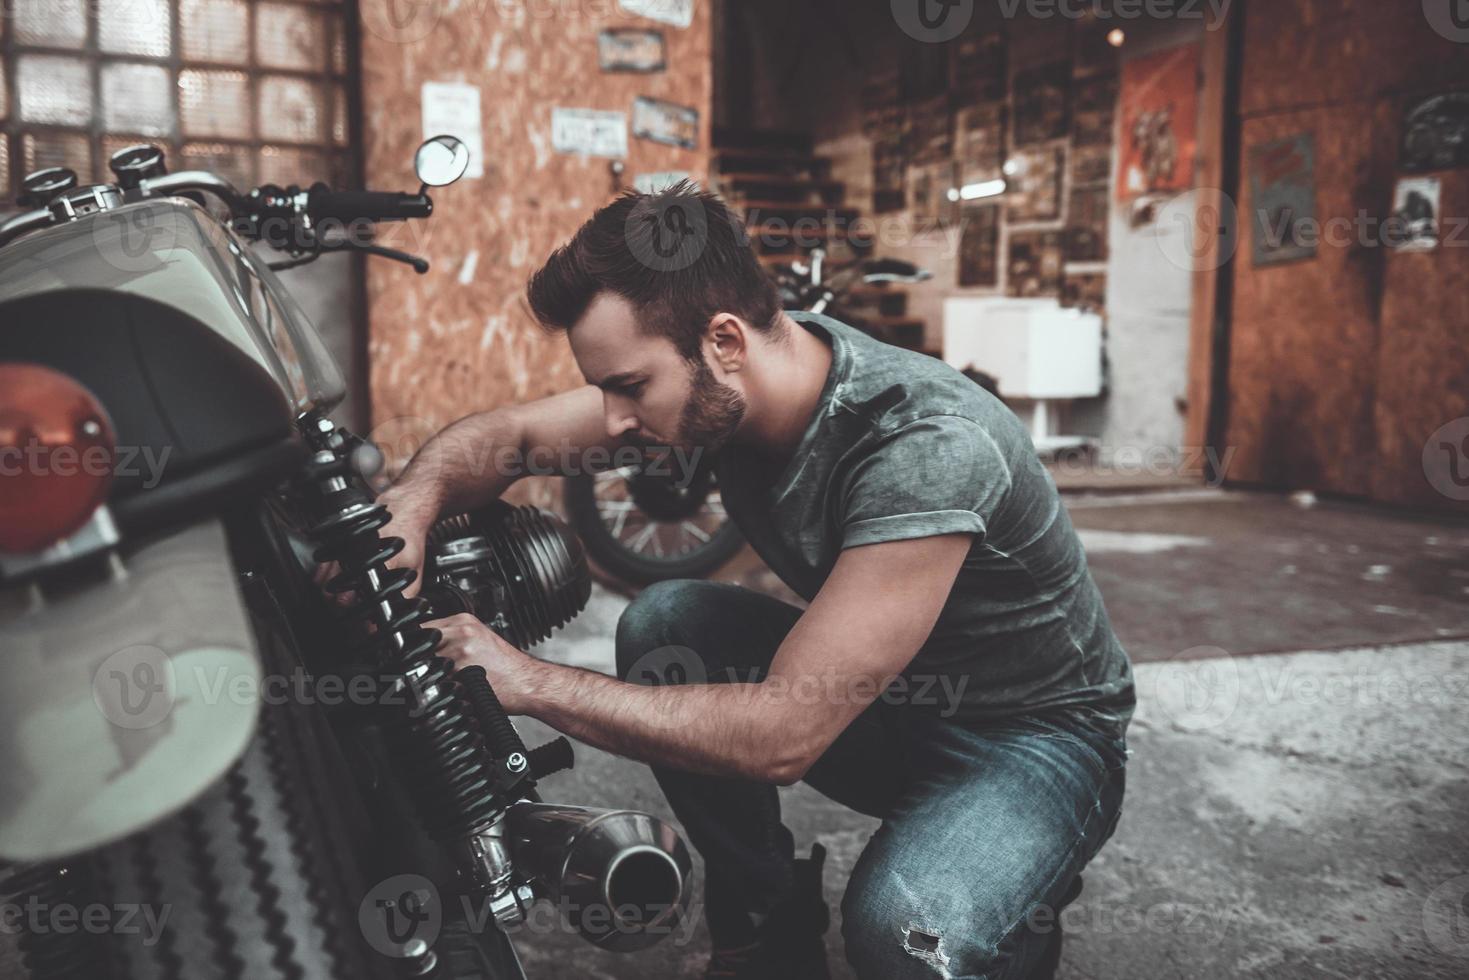 He knows everything about bikes. Confident young man repairing motorcycle near his garage photo